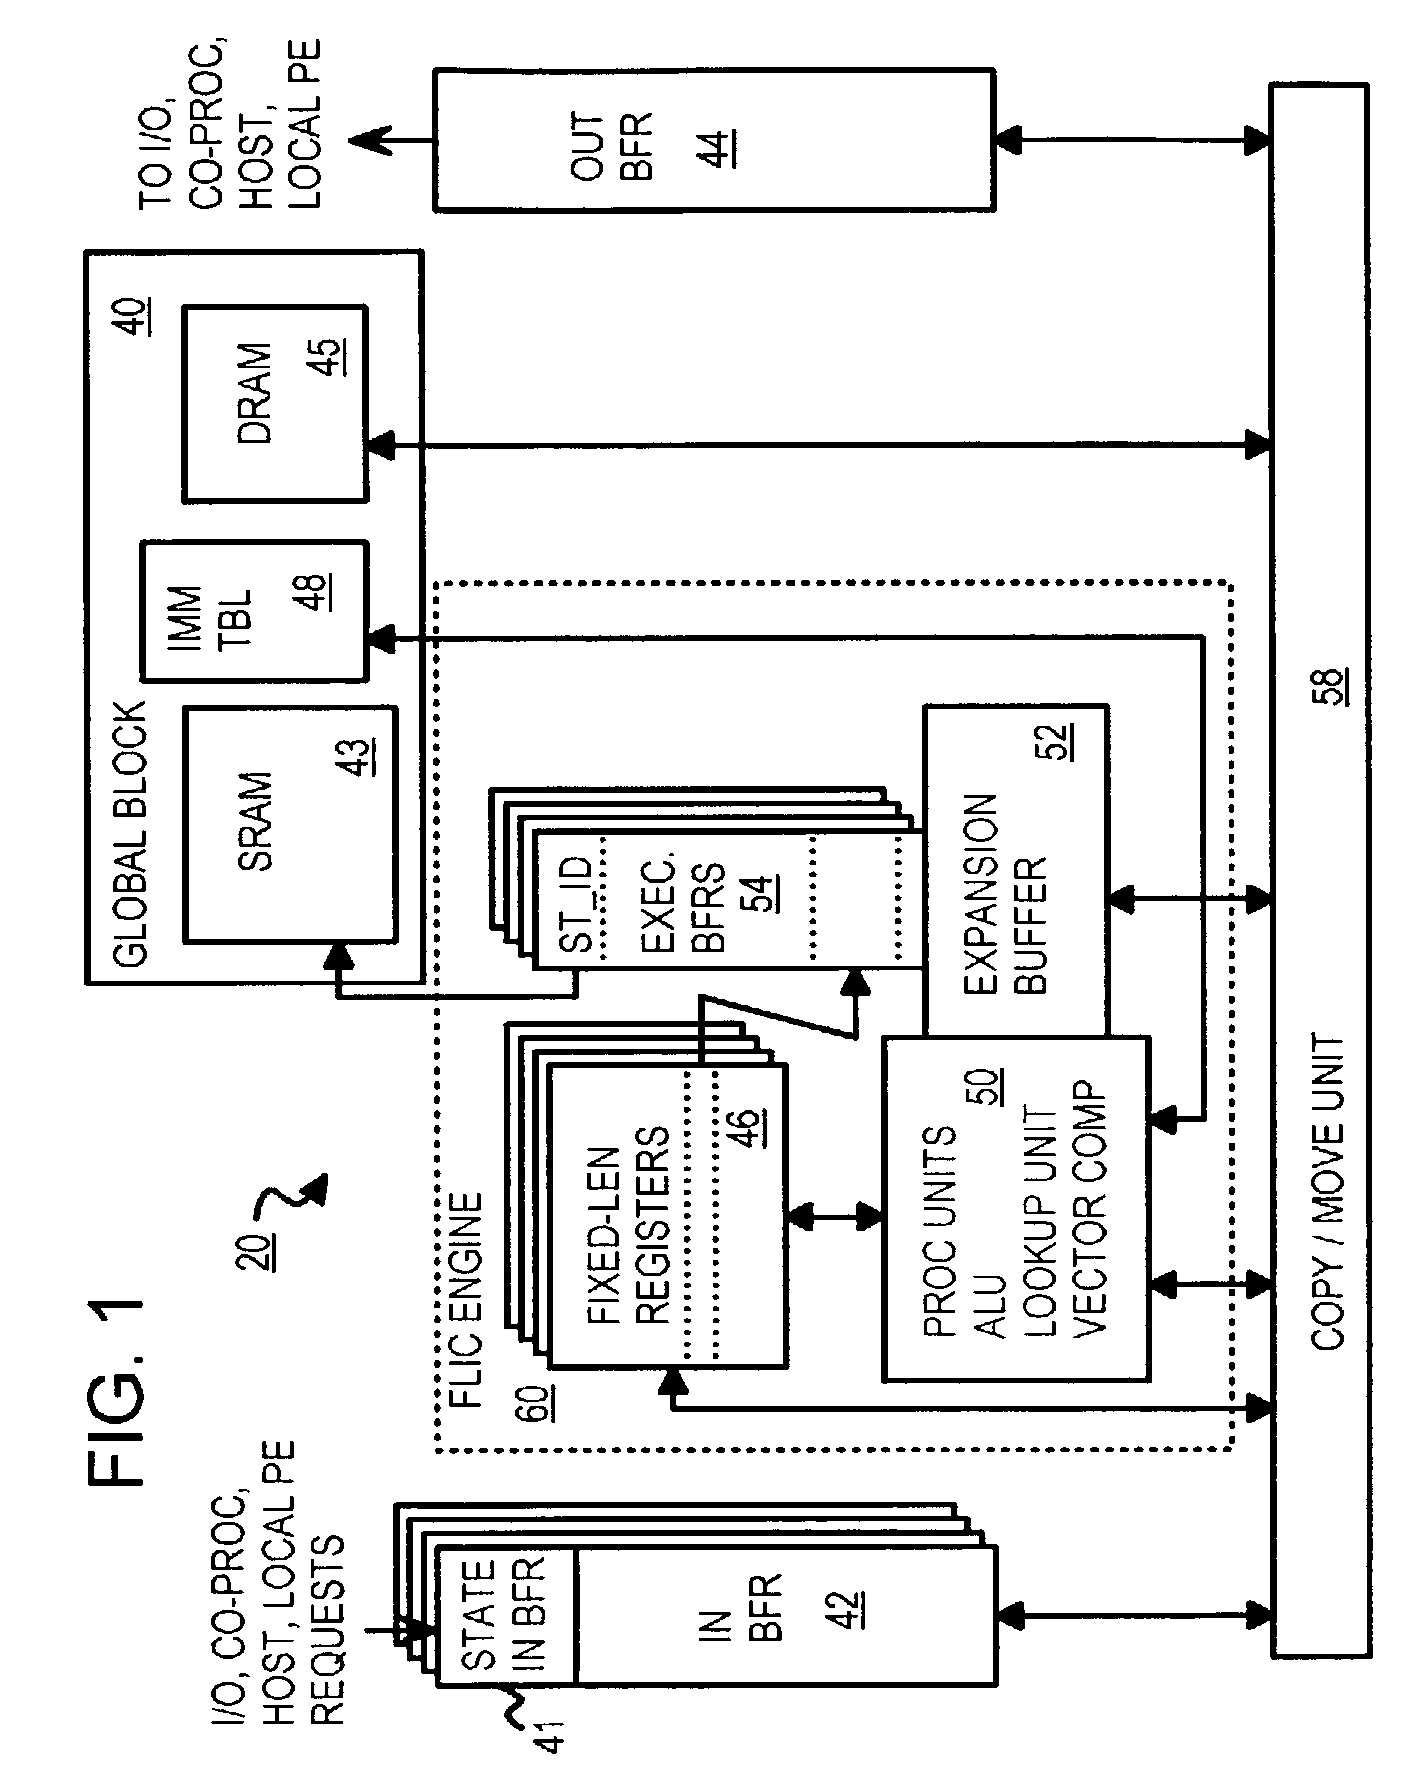 Native copy instruction for file-access processor with copy-rule-based validation